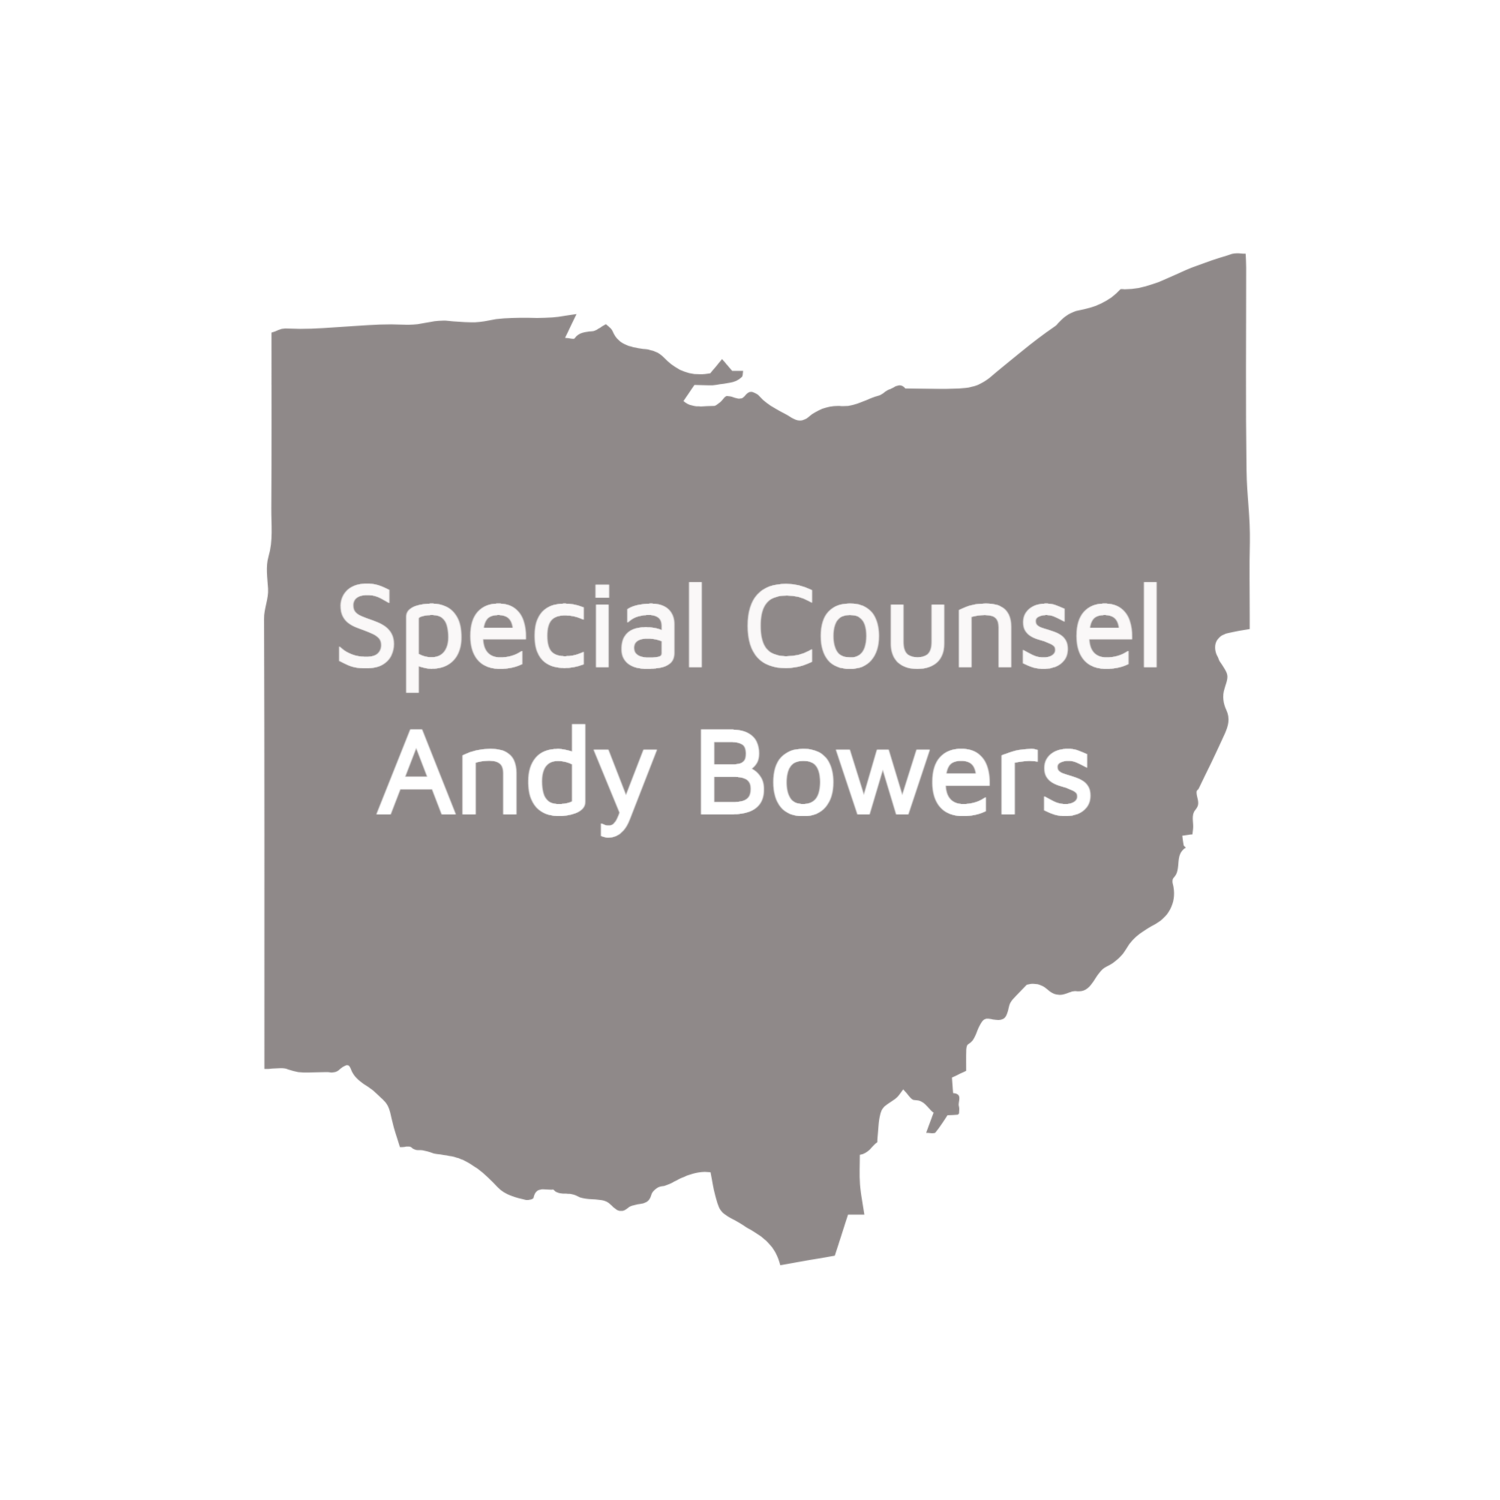 Special Counsel Andy Bowers